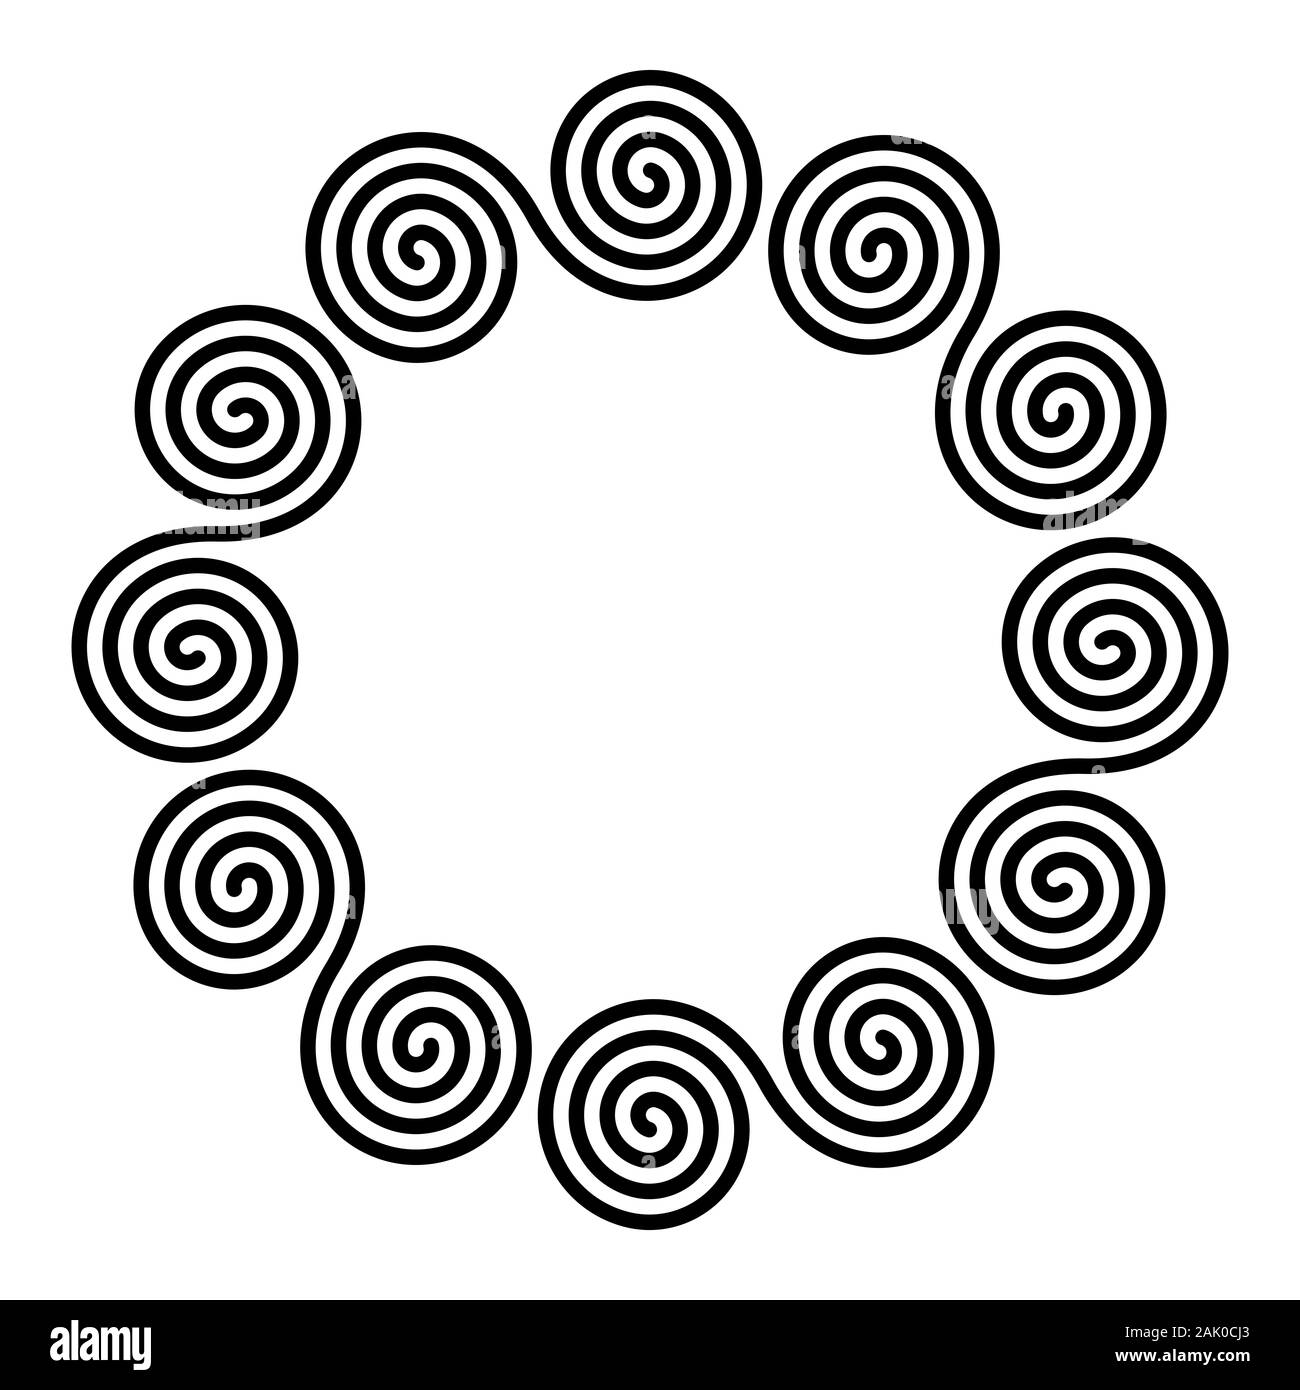 Small circle shaped frame of six linear double spirals. Interlocked combined spirals forming a decorative motif, constructed from repeated lines. Stock Photo